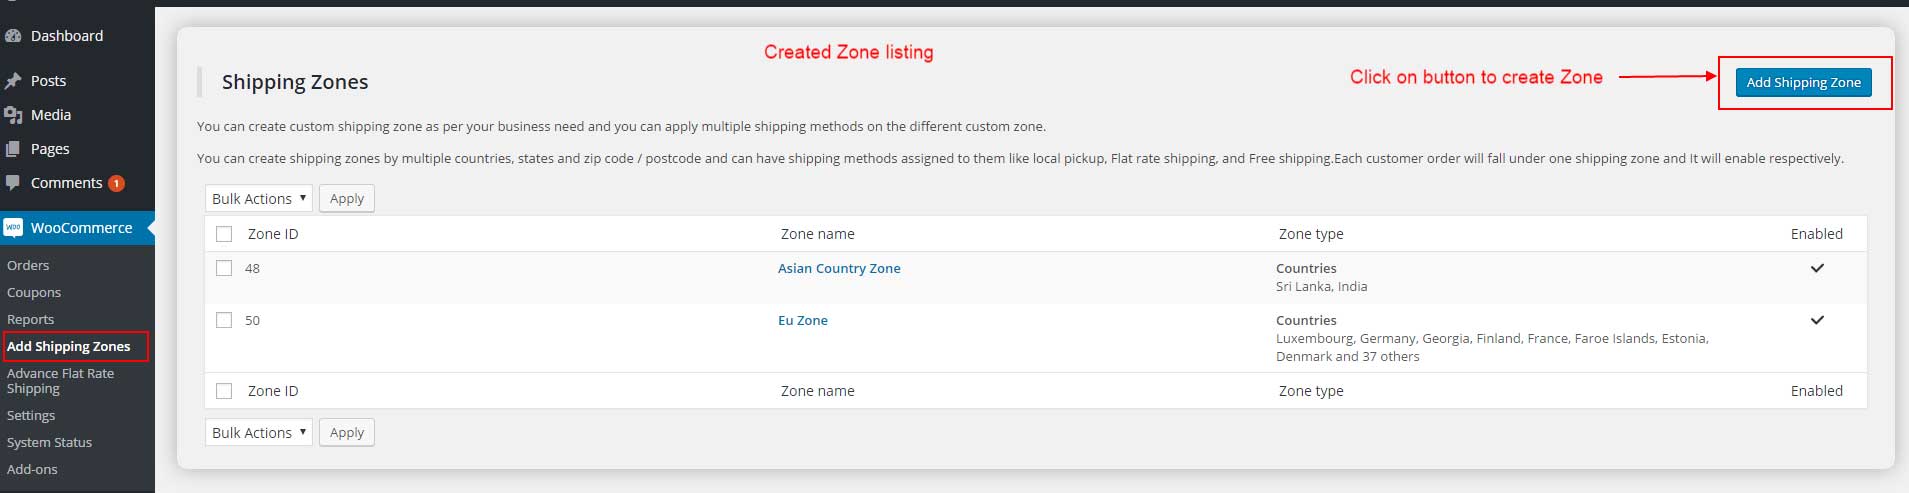 Create New Shipping Zone Step 1